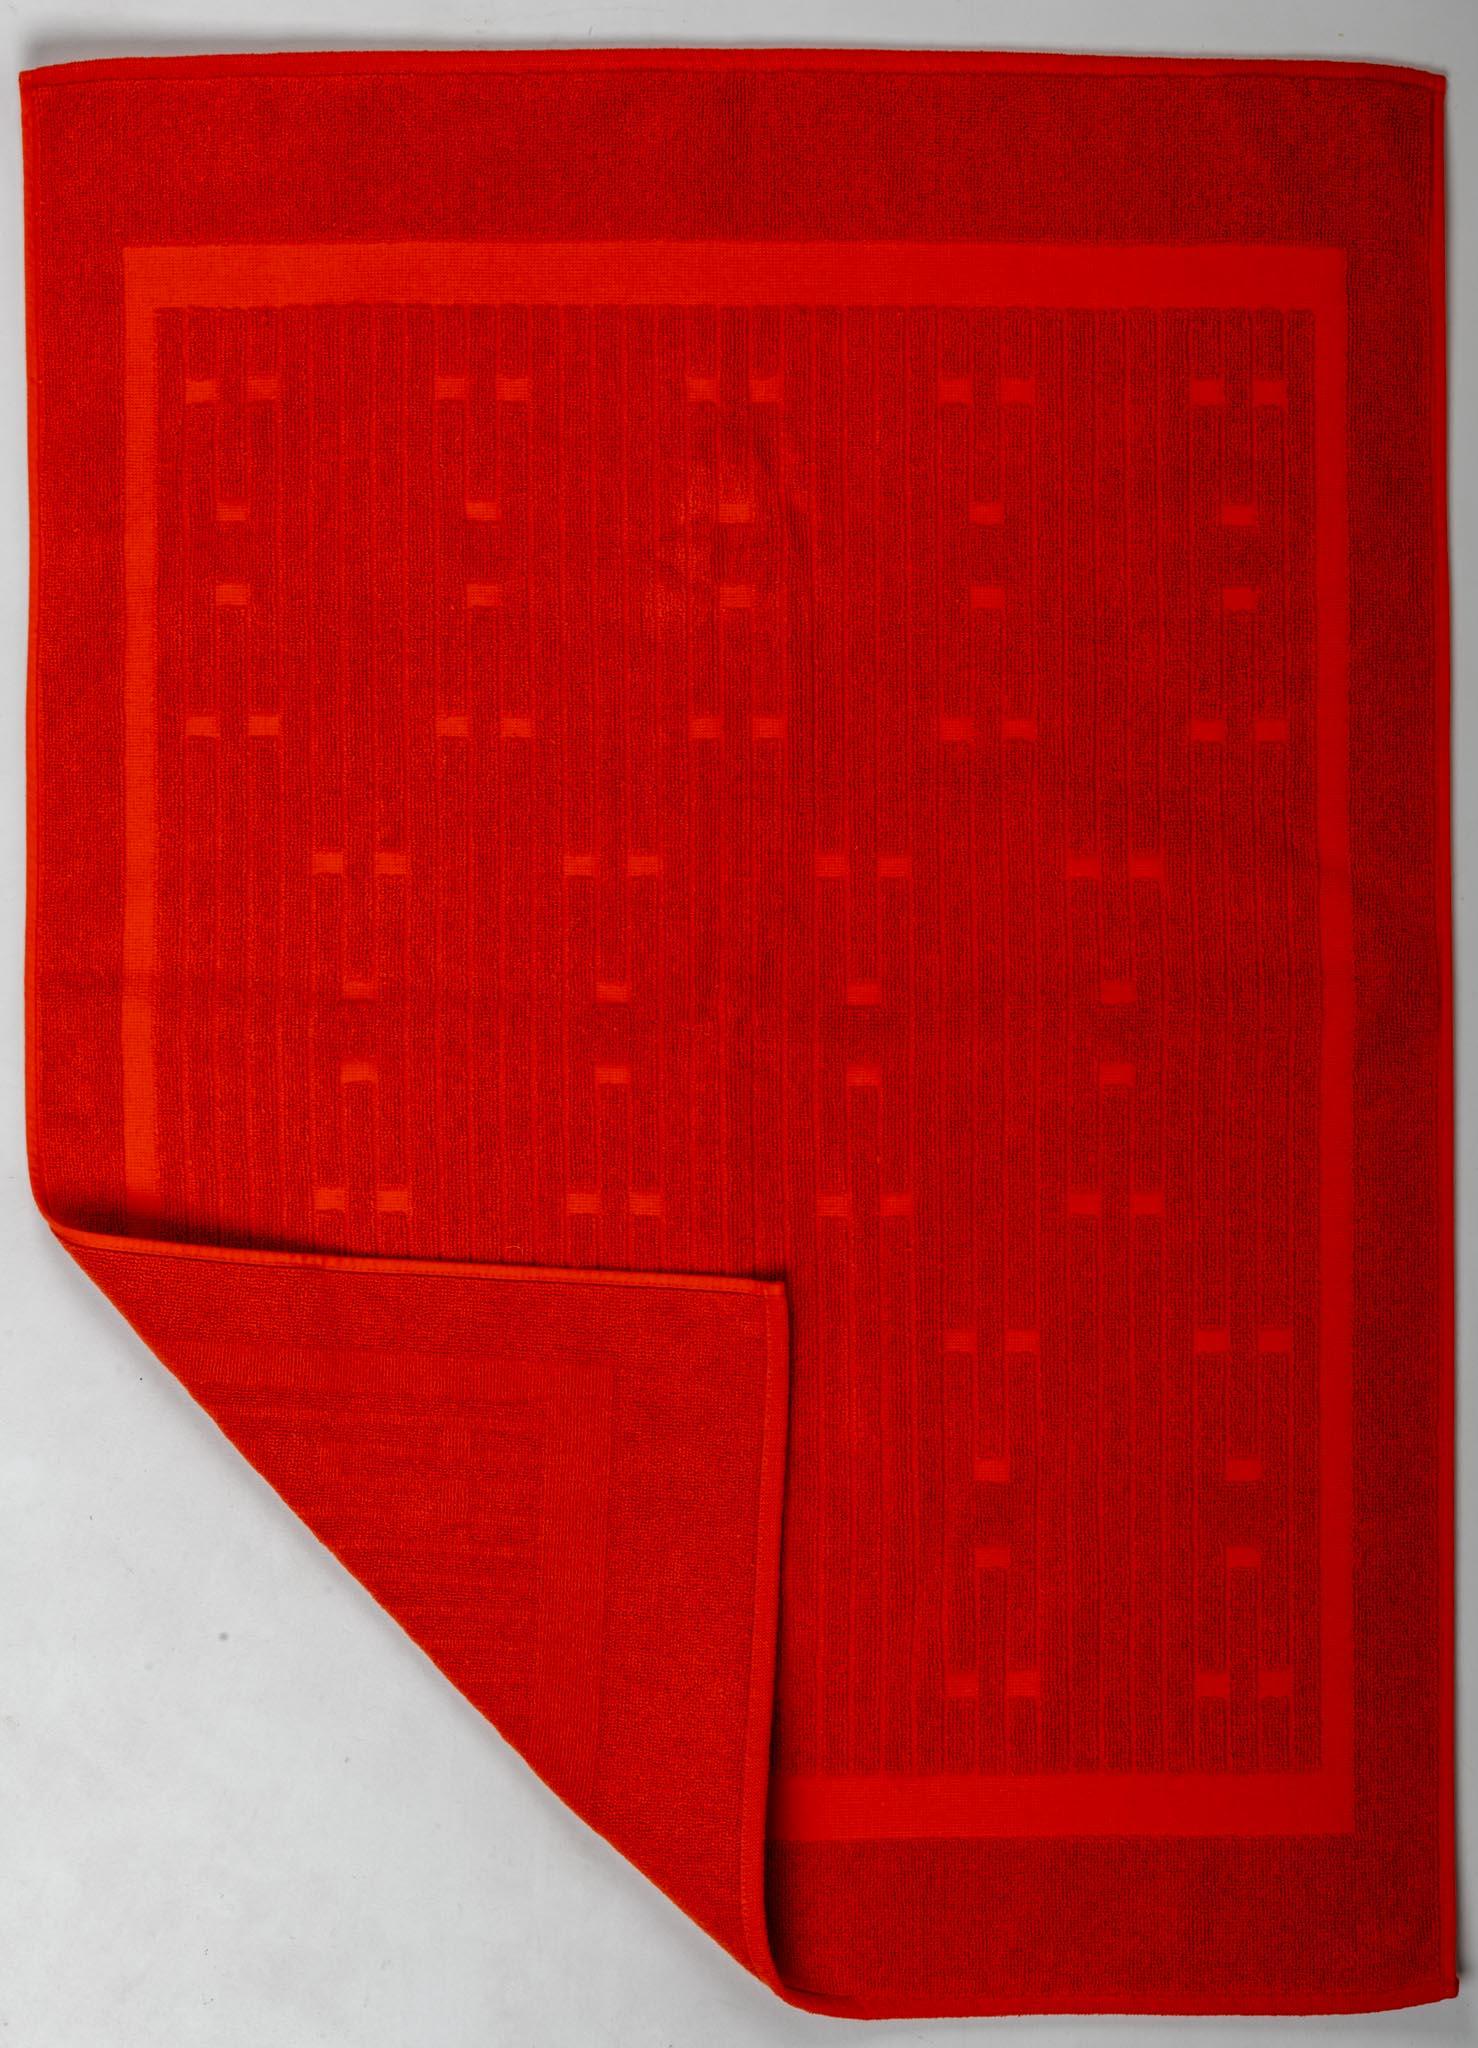 Hermes ,brand new in box, bathroom rug in 100% cotton. Red/rust color. Original tag attached.